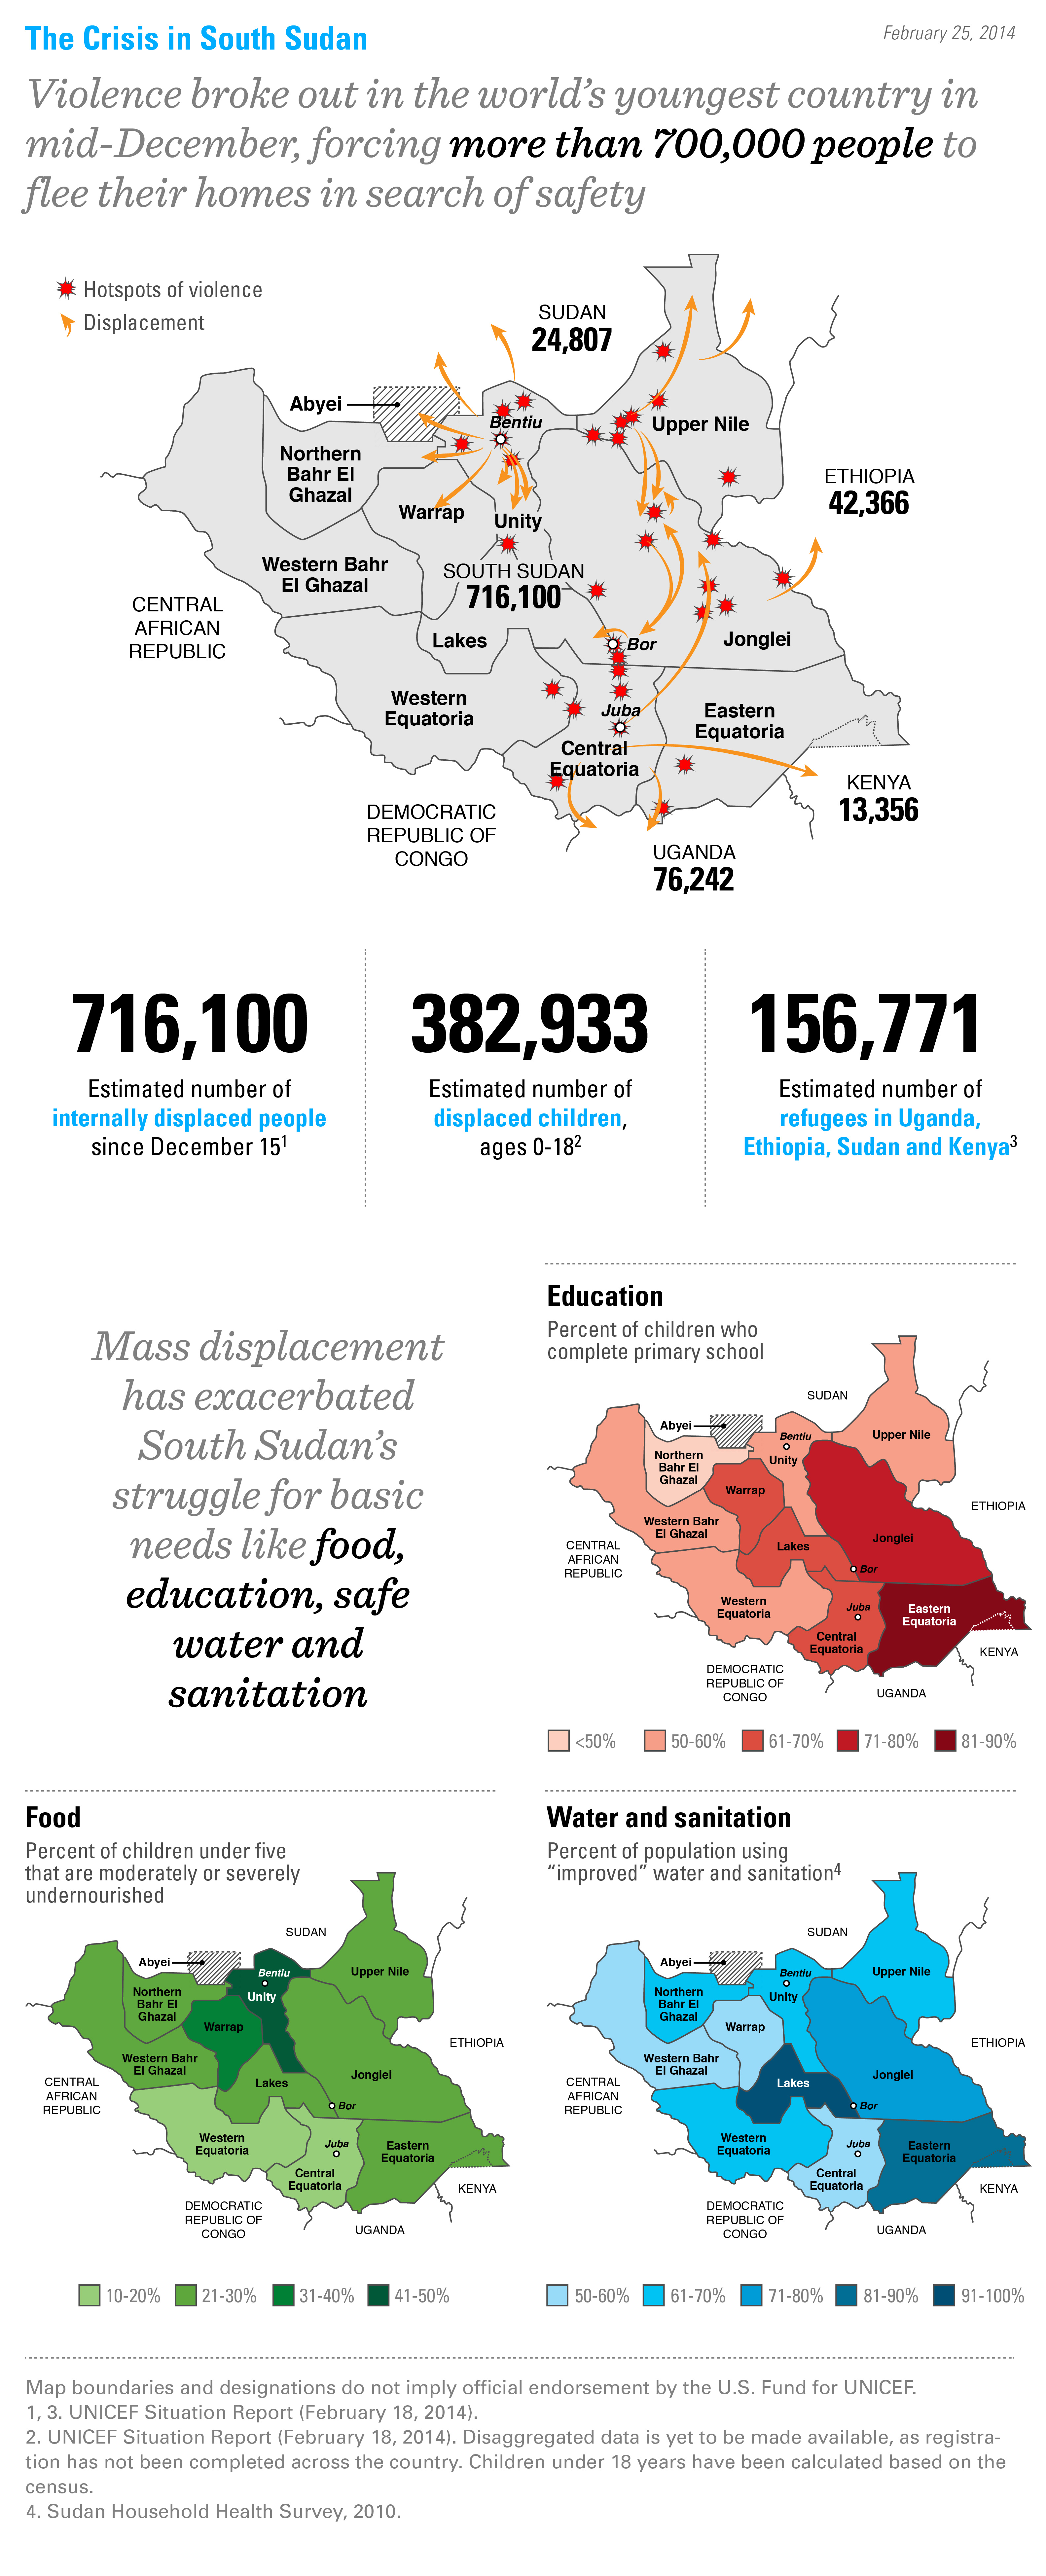 Infographic: Facts About the Crisis in South Sudan